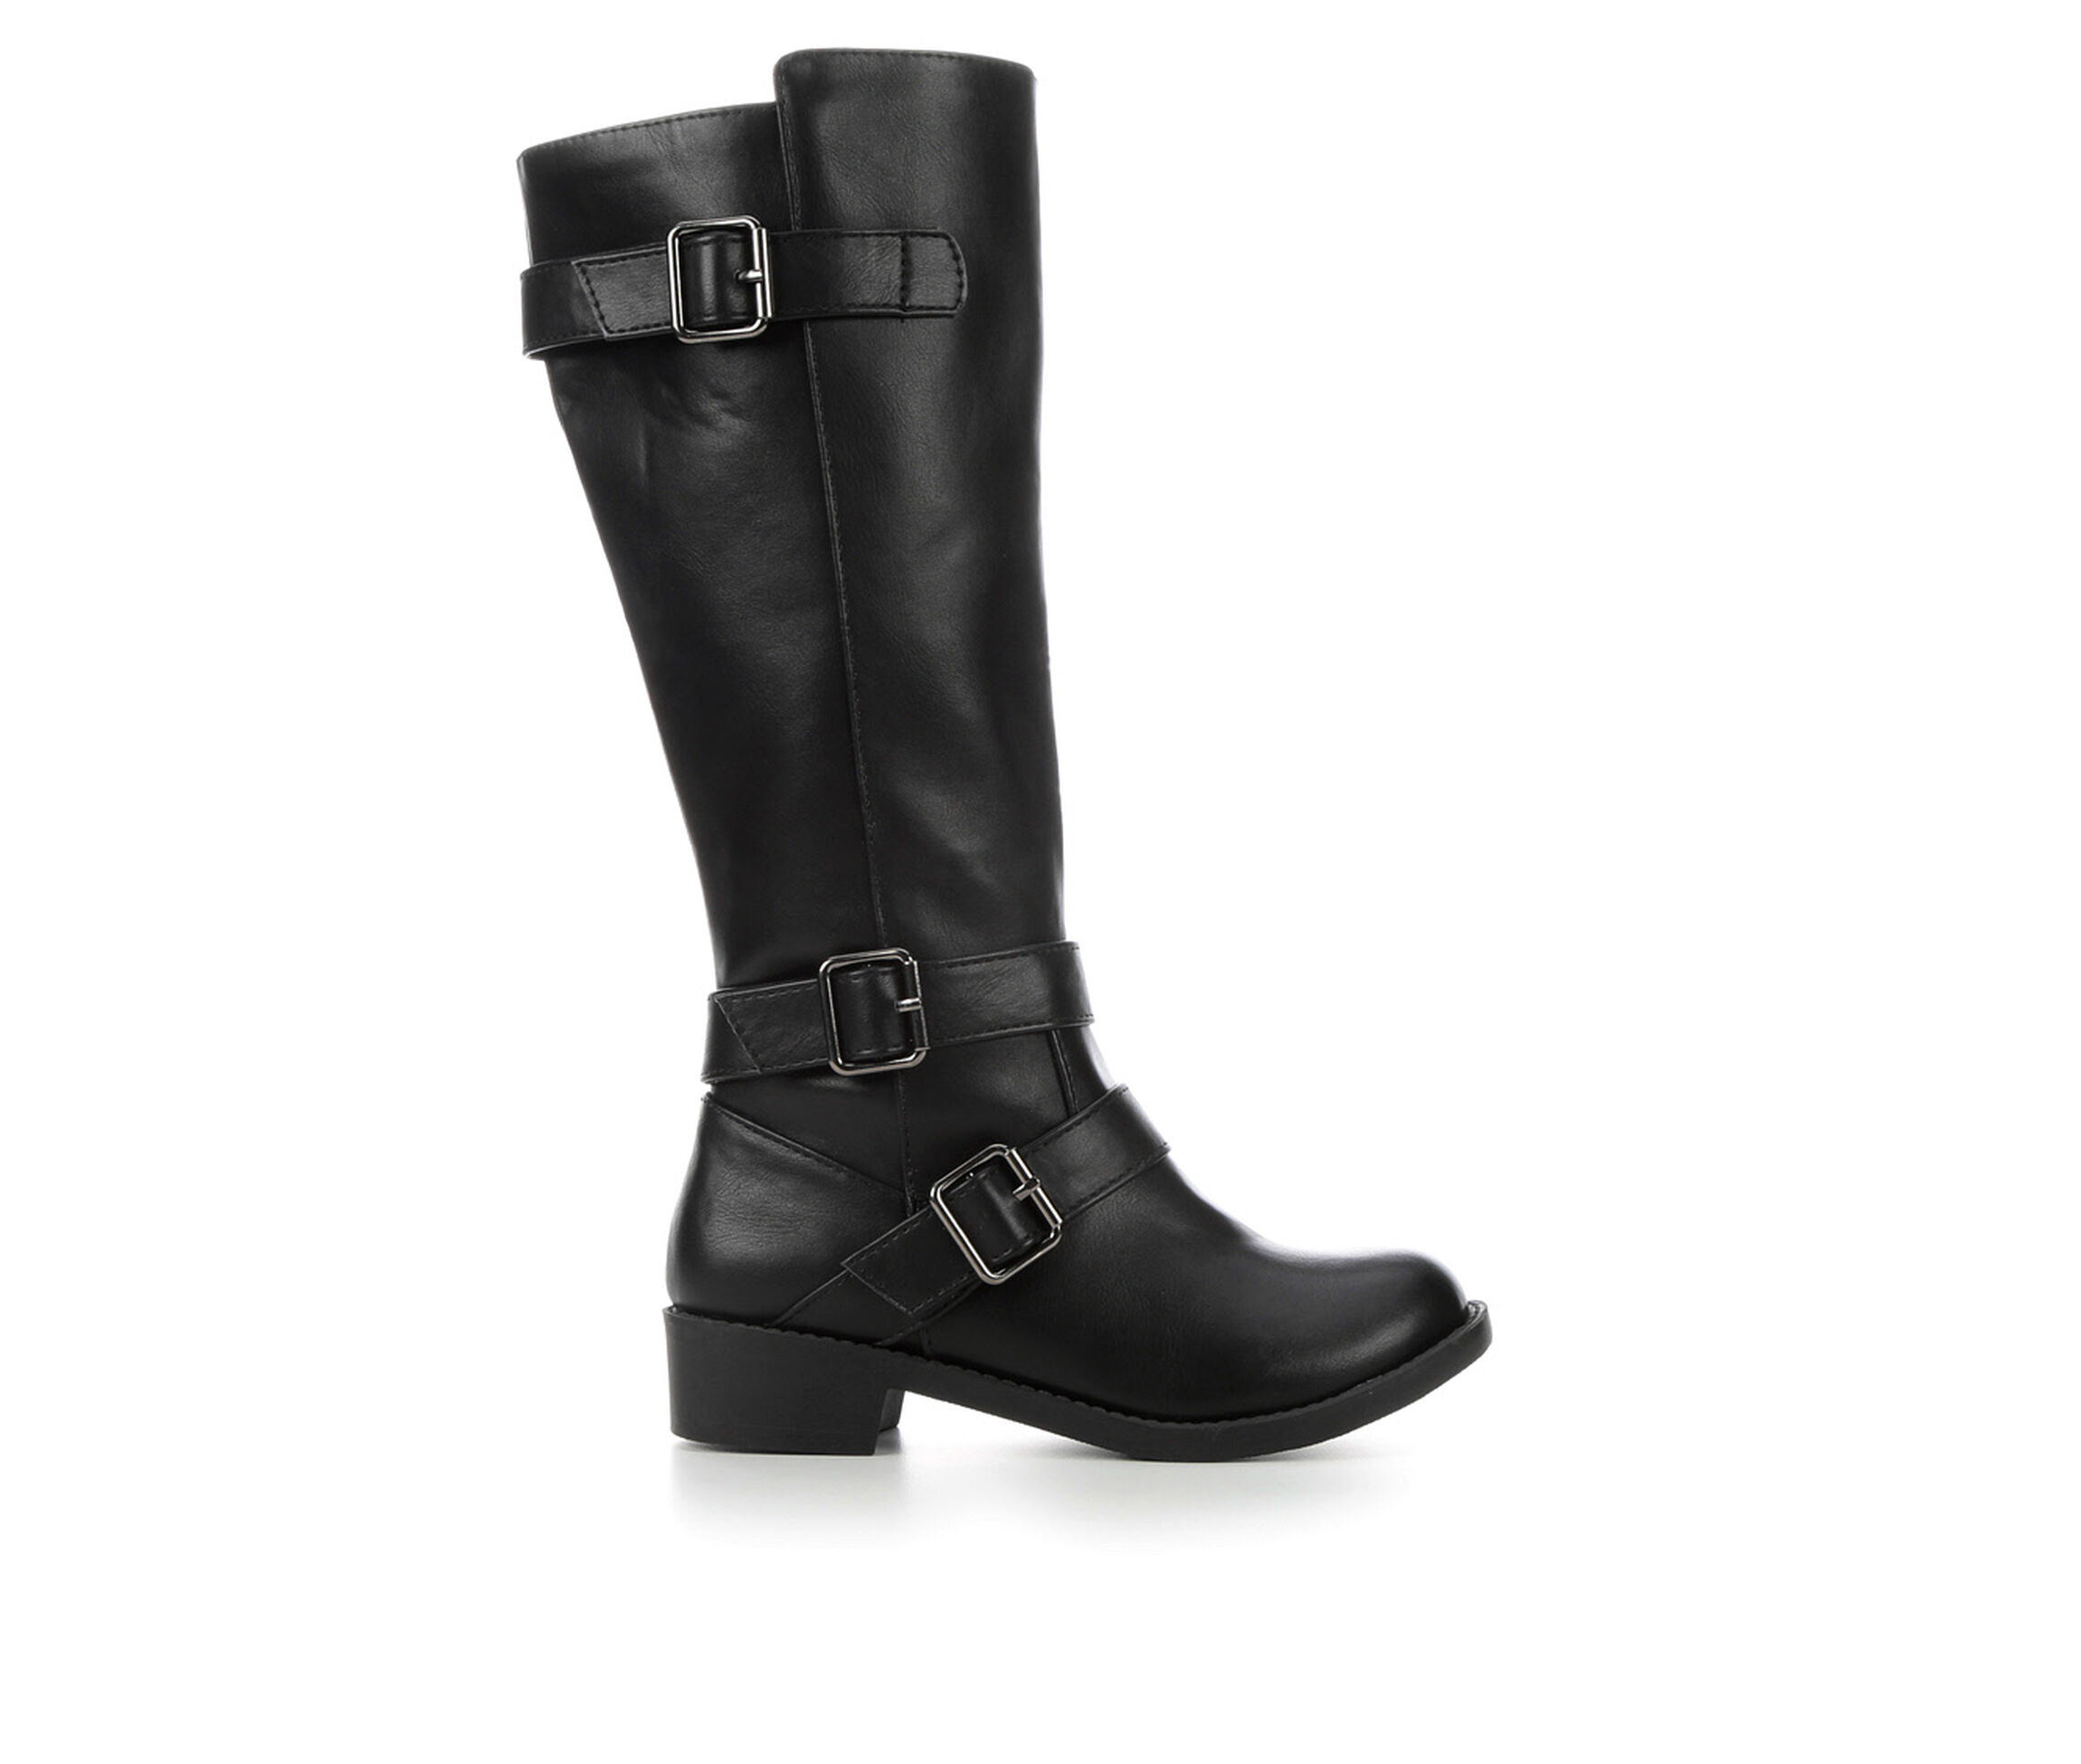 Girls' Knee High & Riding Boots | Shoe Carnival